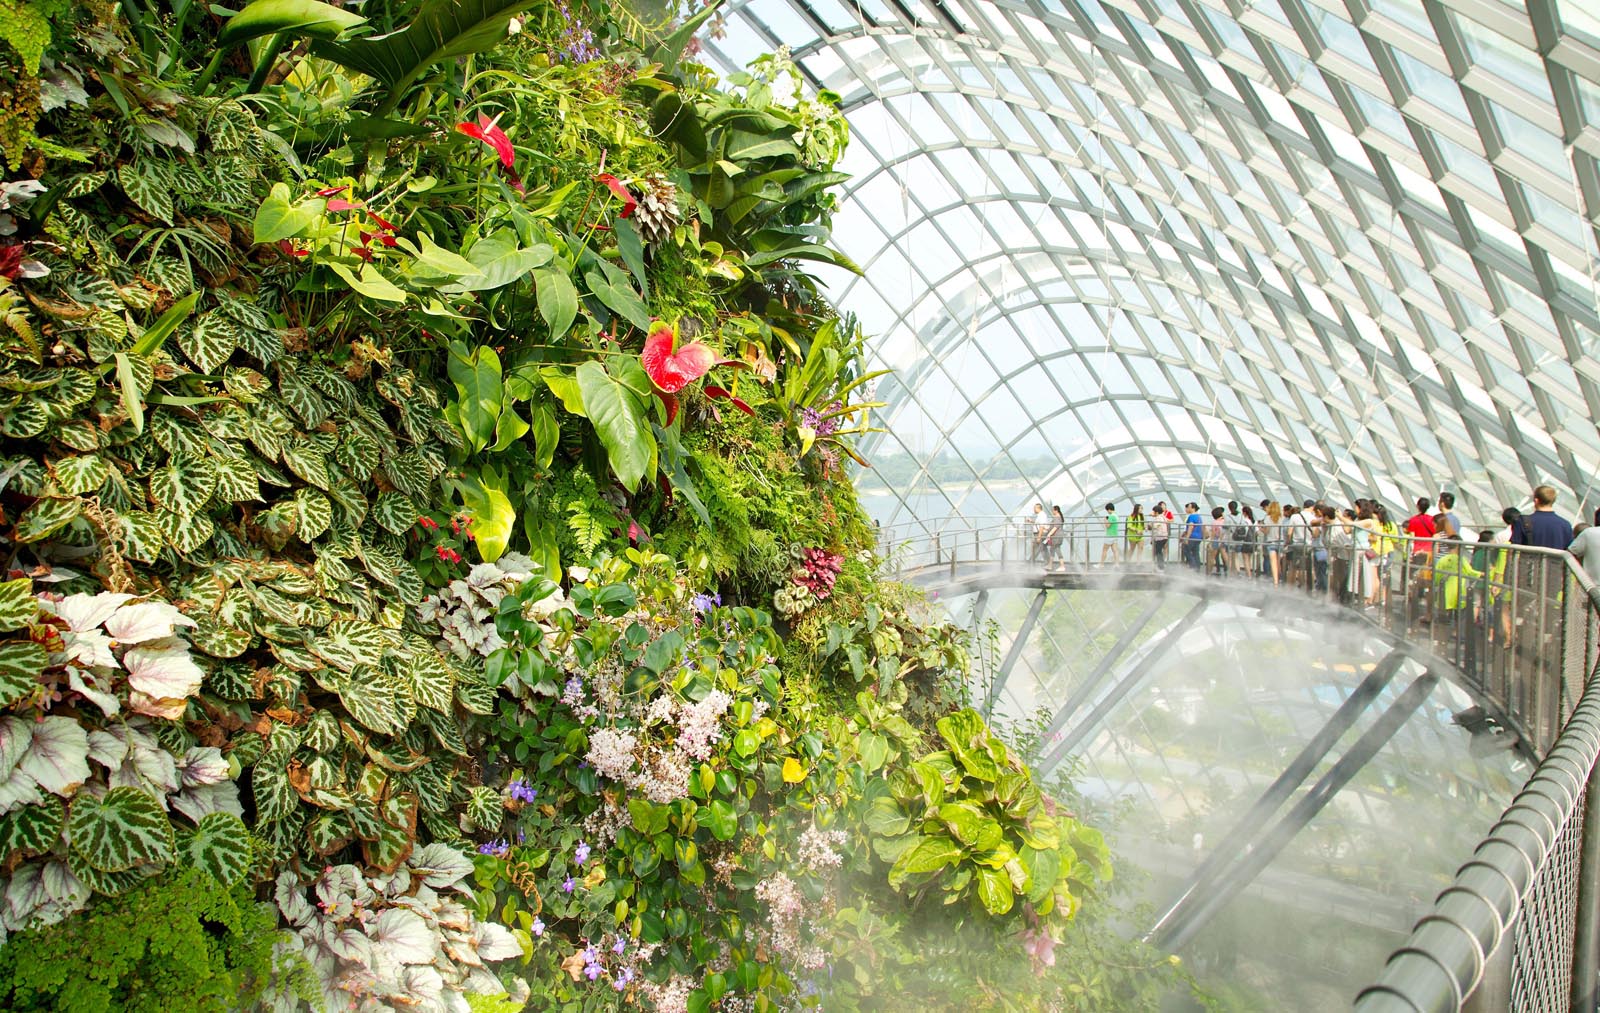 Gardens by the bay greenhouse with tourists